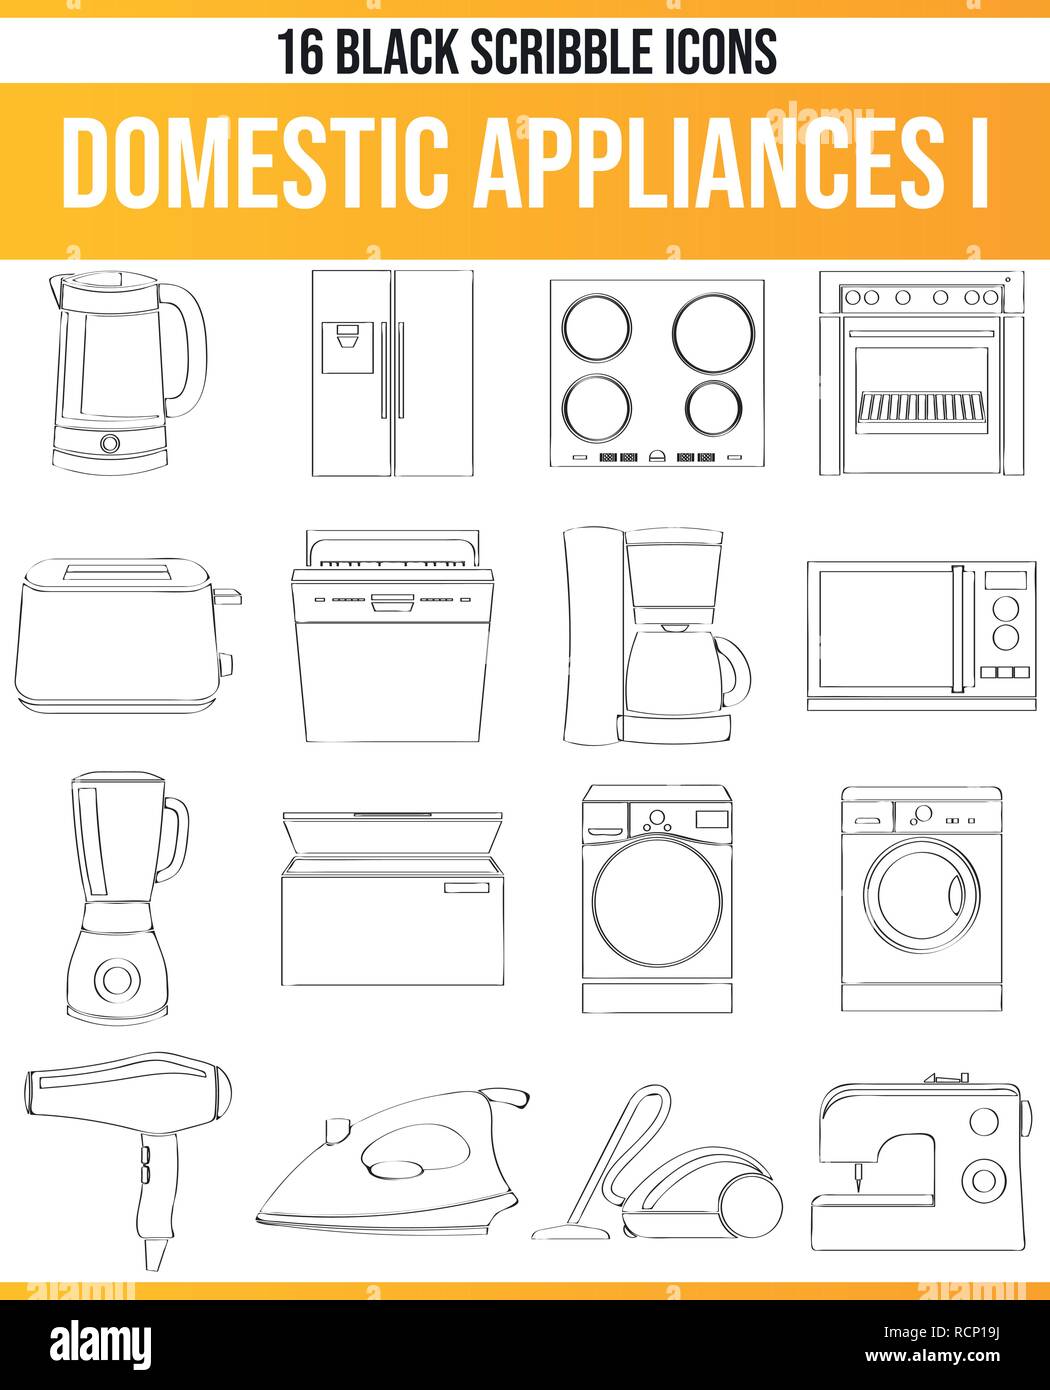 Black pictograms / icons on home appliances. This icon set is perfect for creative people and designers who need the issue of household appliances in  Stock Vector